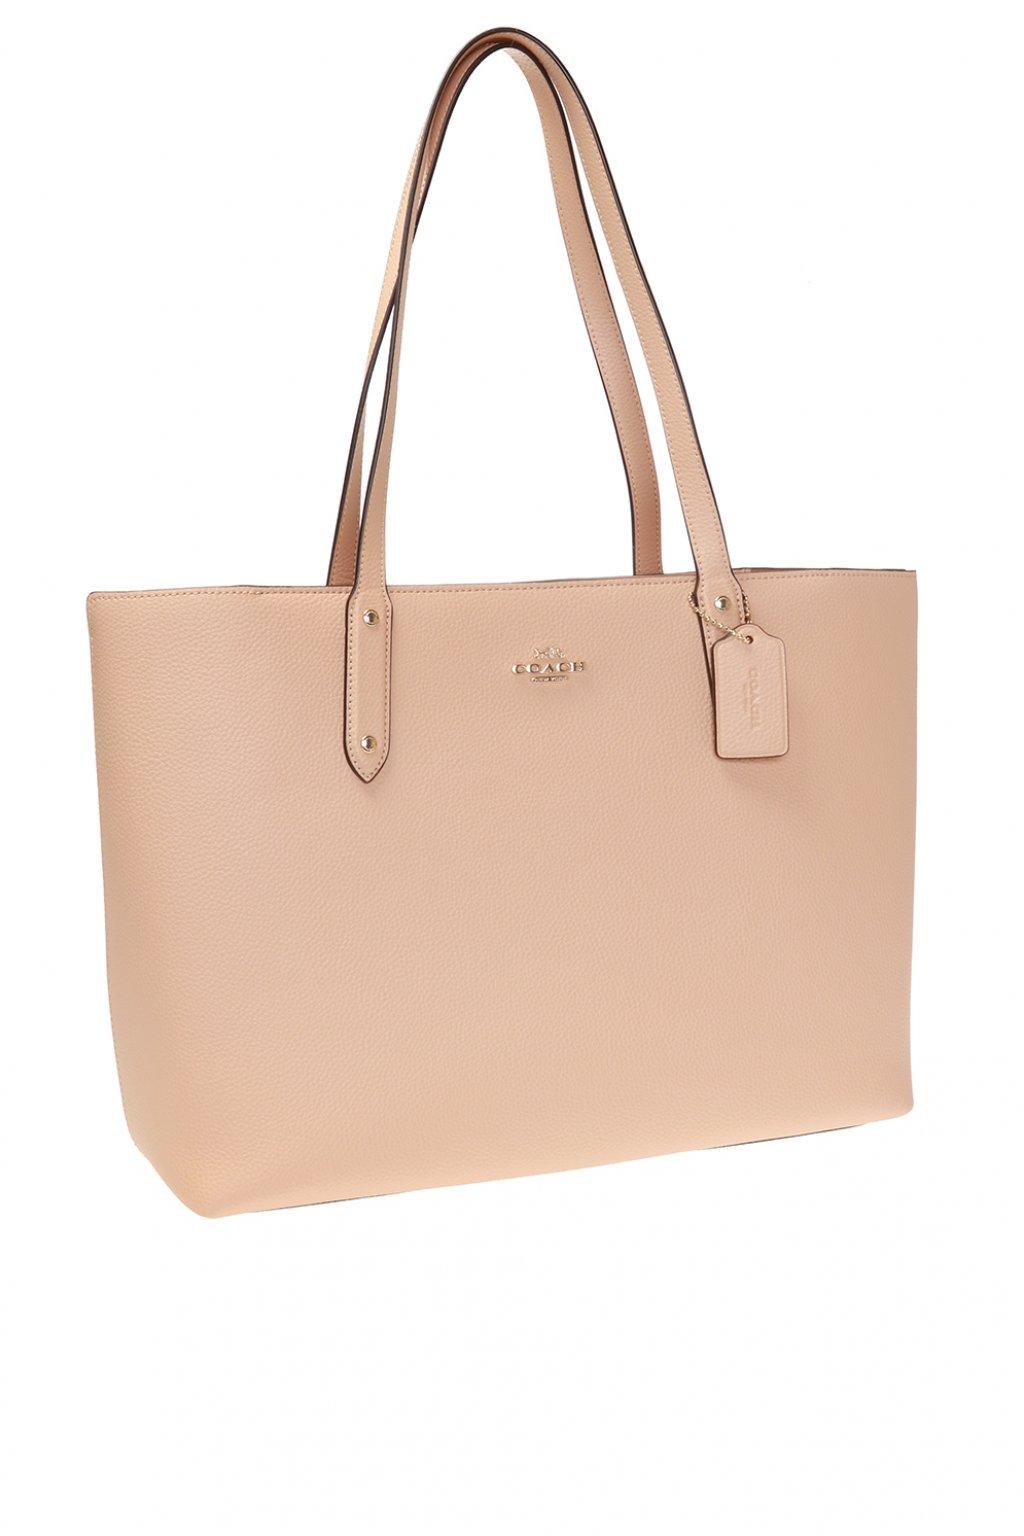 steeg web terras COACH Leather 'central' Tote Bag Beige in Natural - Lyst